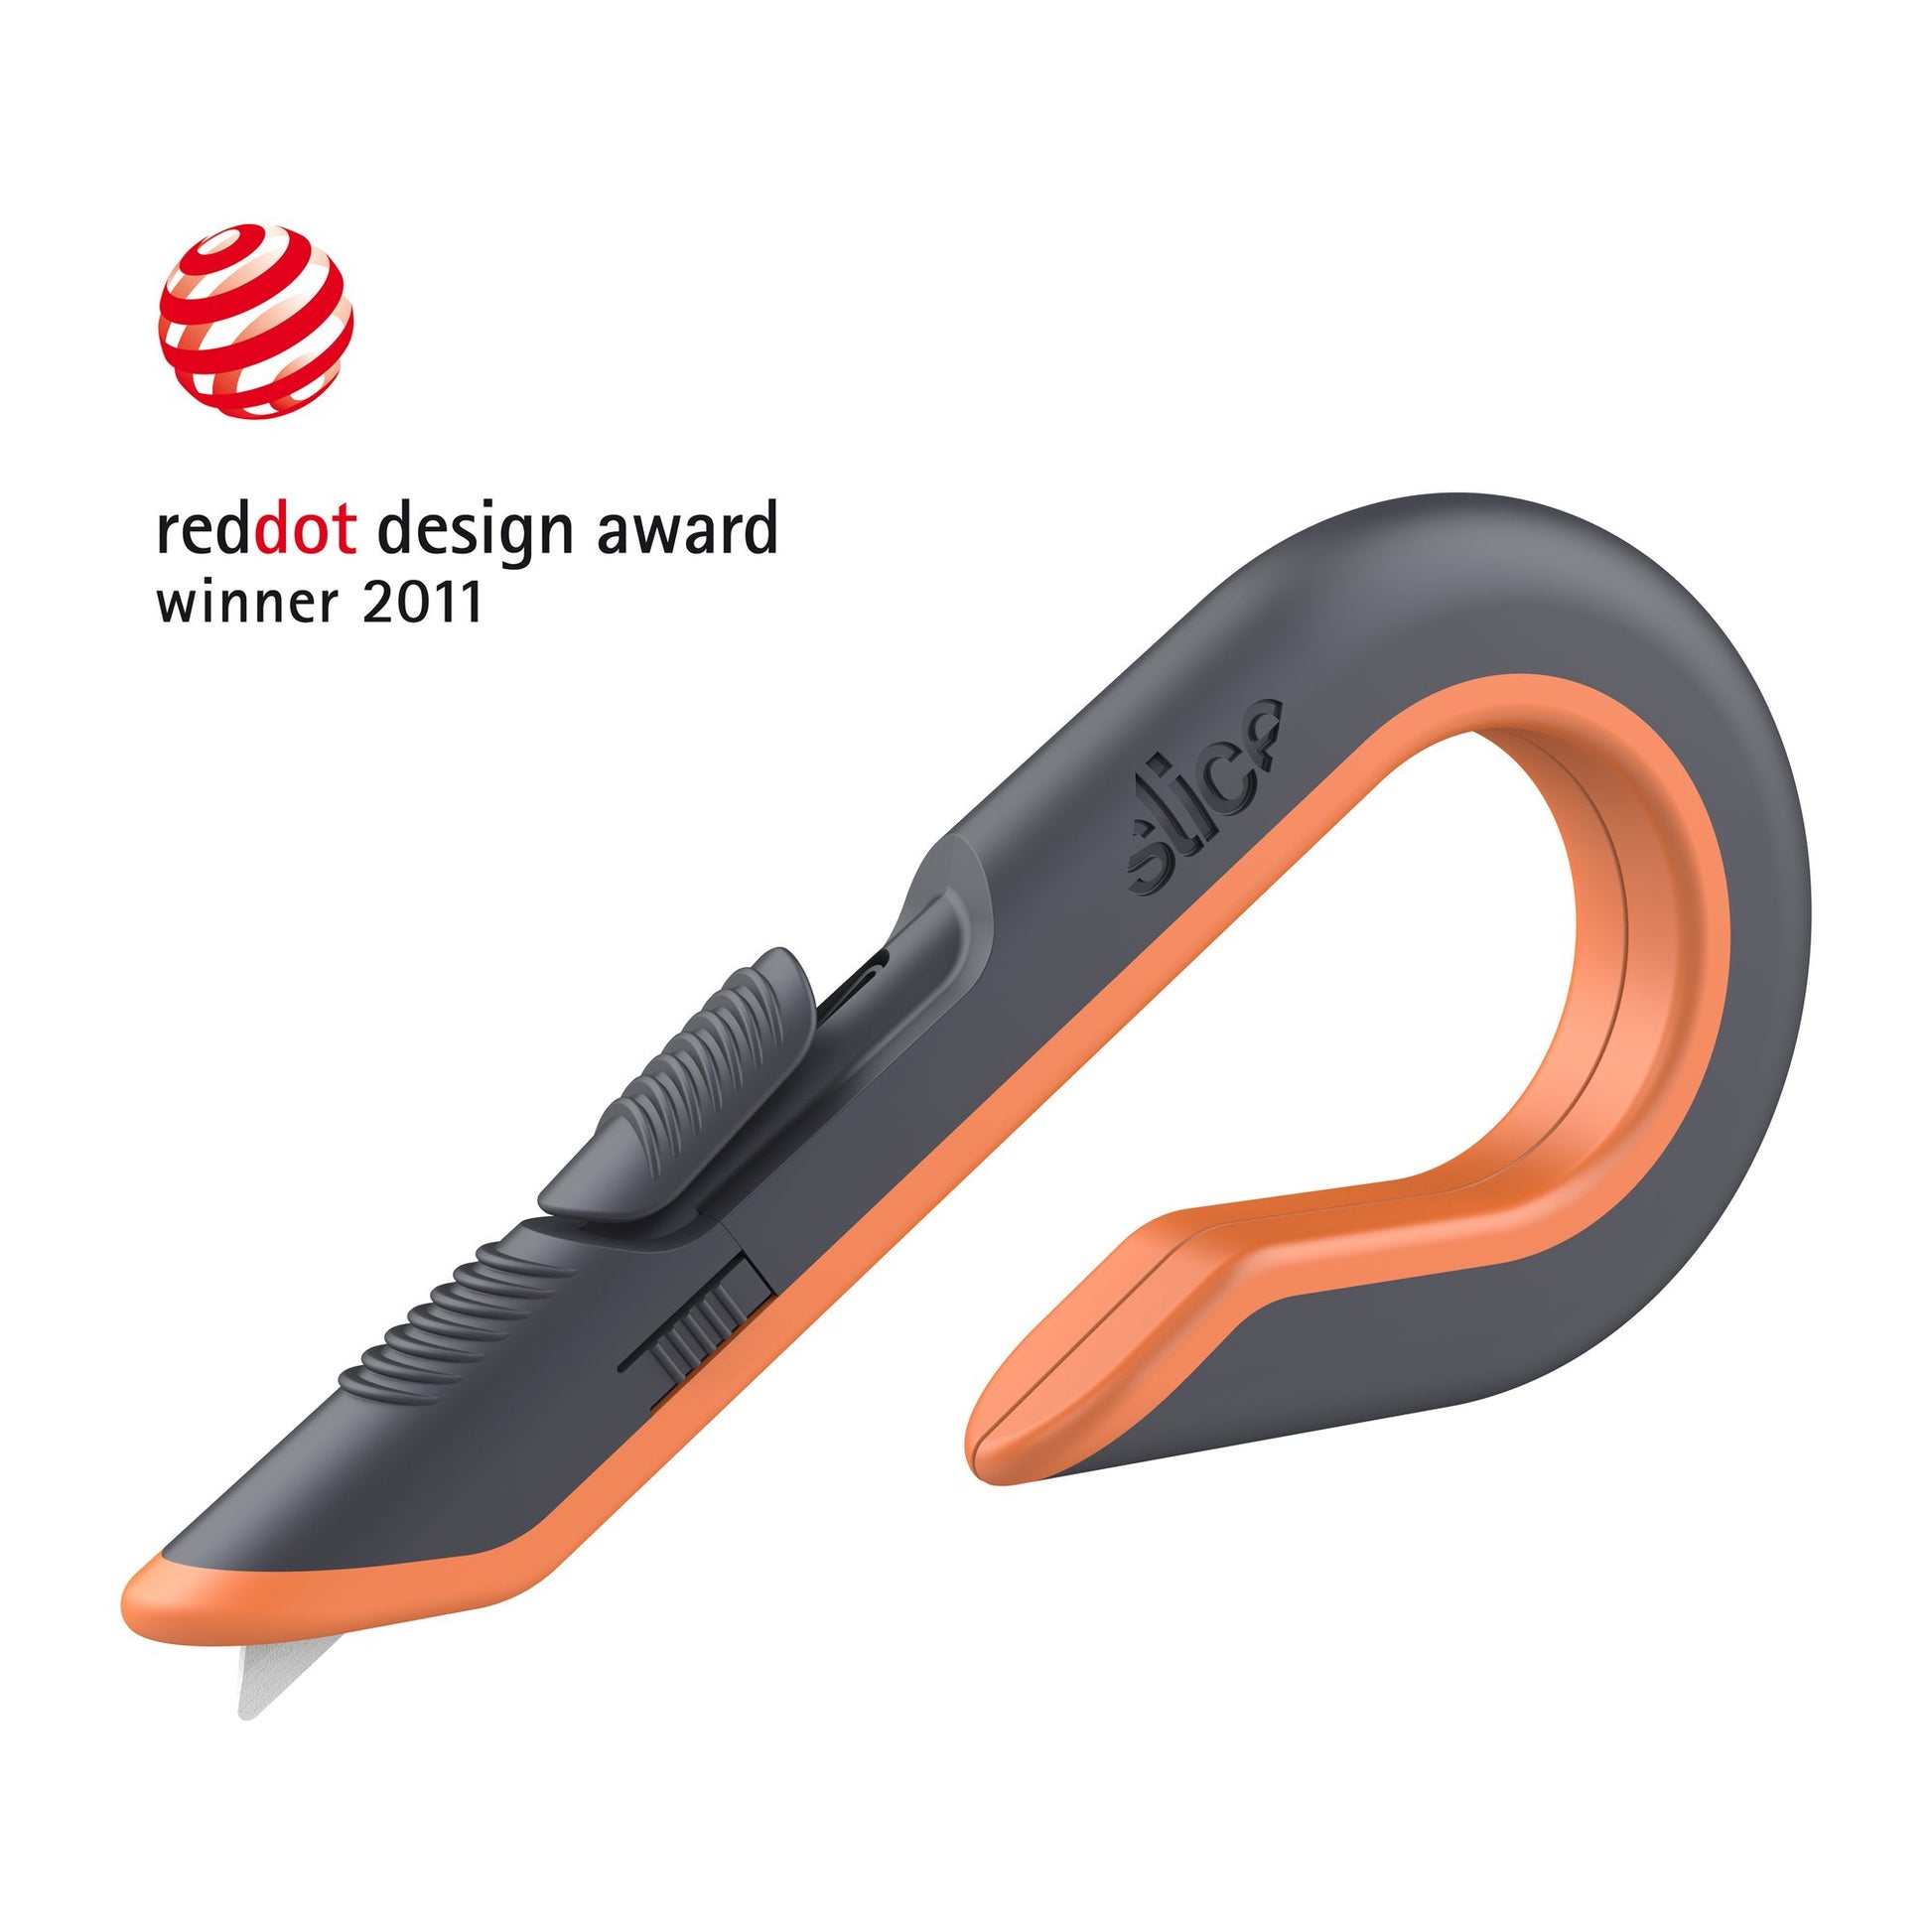 The Slice® 10400 Manual Box Cutter with safety blade